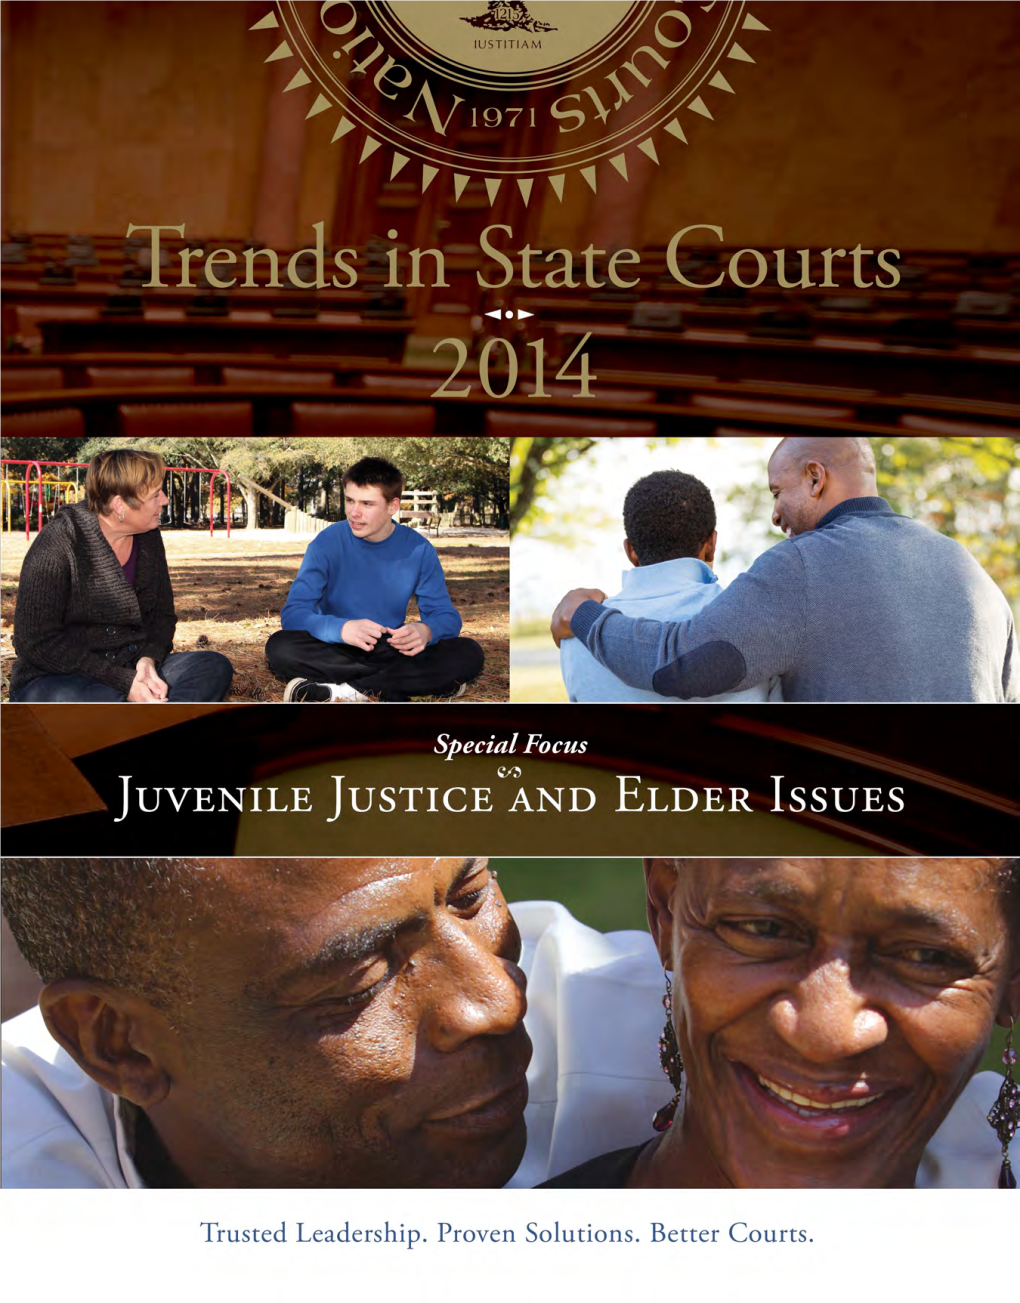 Trends in State Courts 2014 Special Focus on Juvenile Justice and Elder Issues